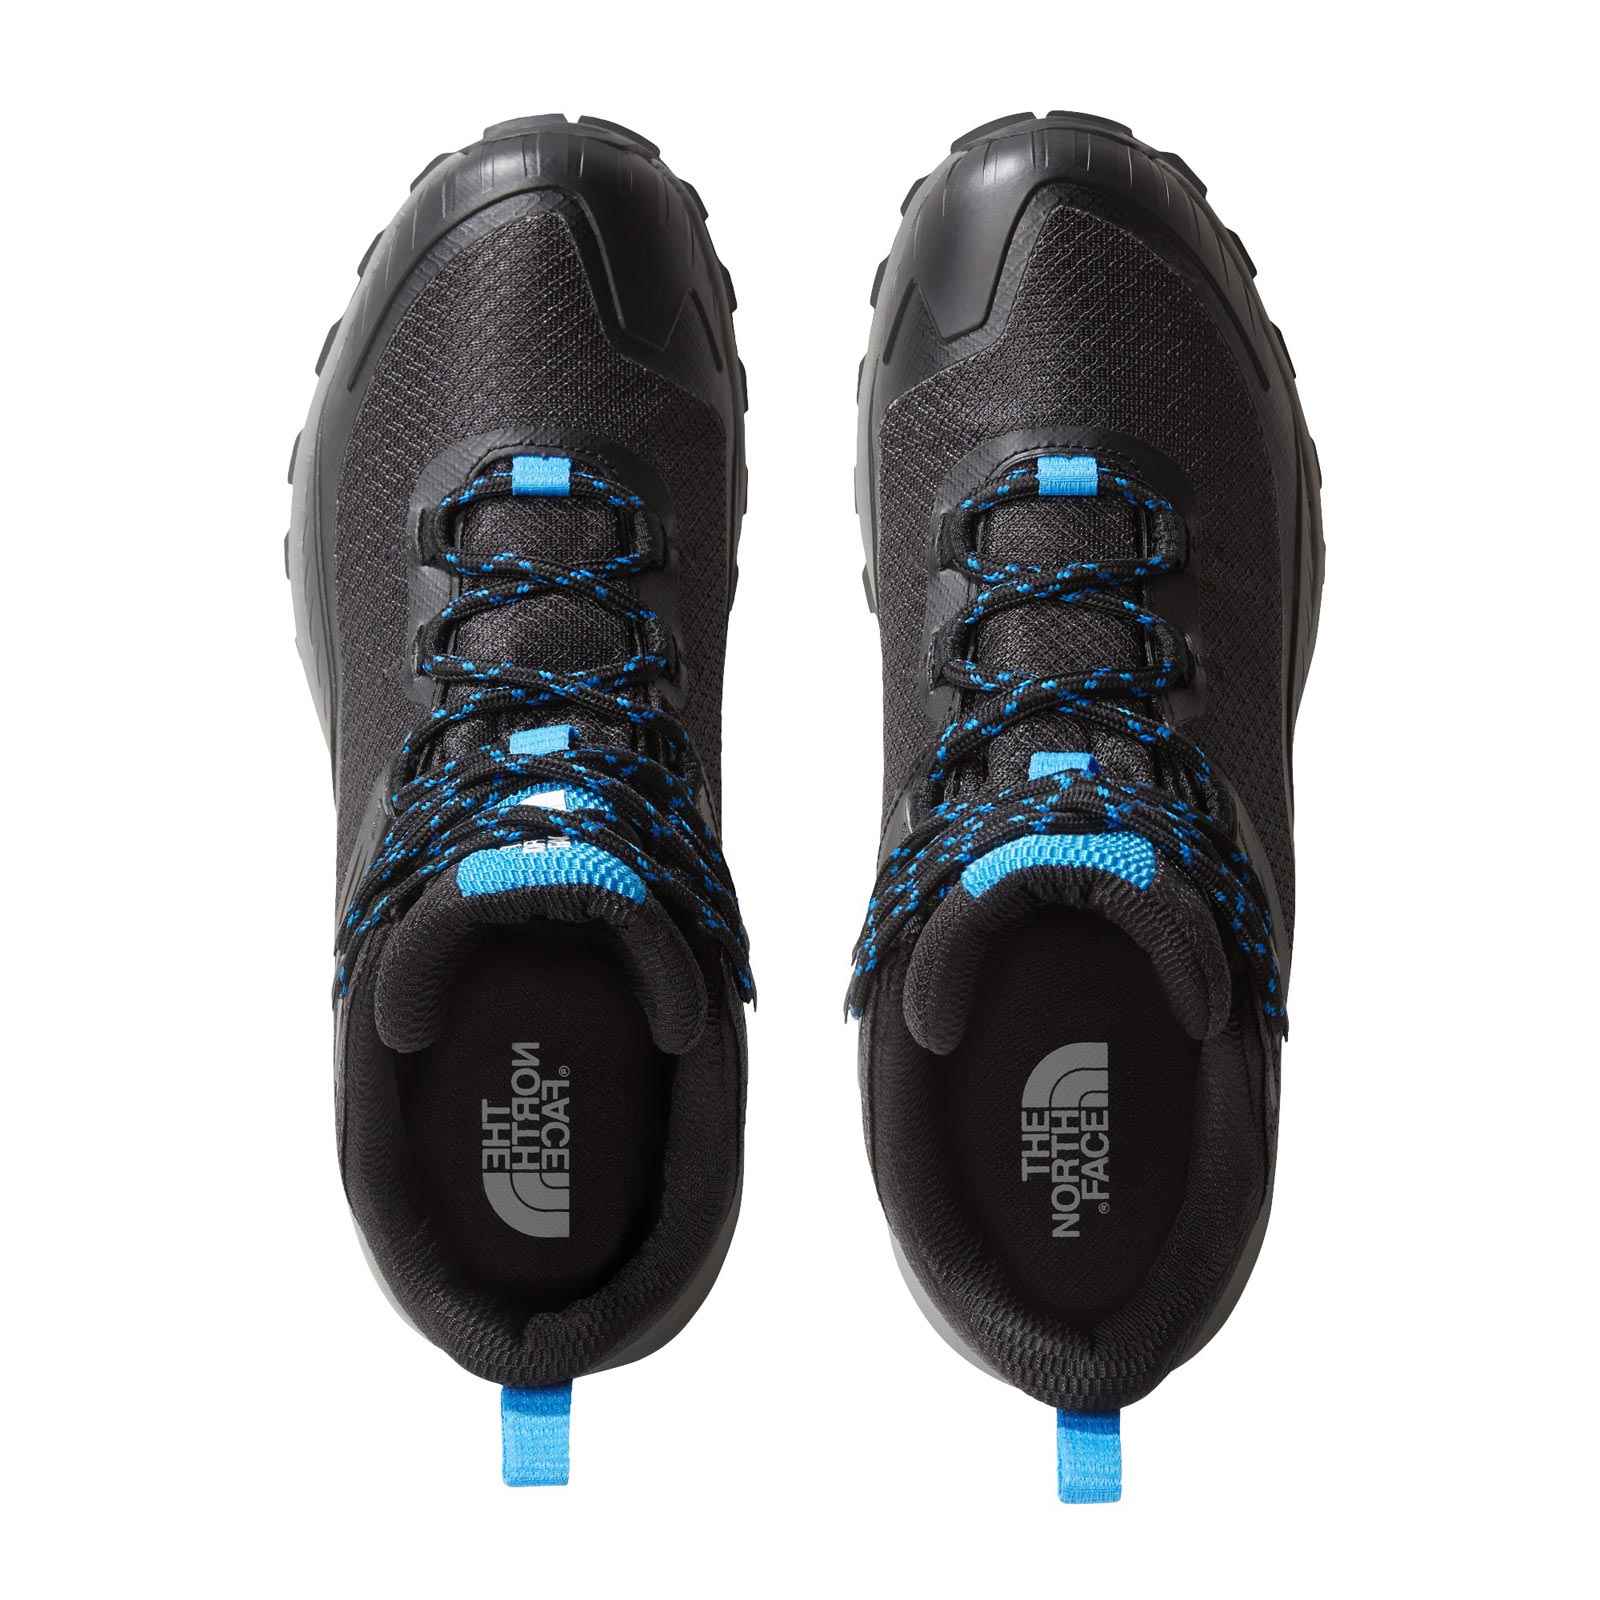 THE NORTH FACE CRAGMONT MID MENS WATERPROOF HIKING BOOTS